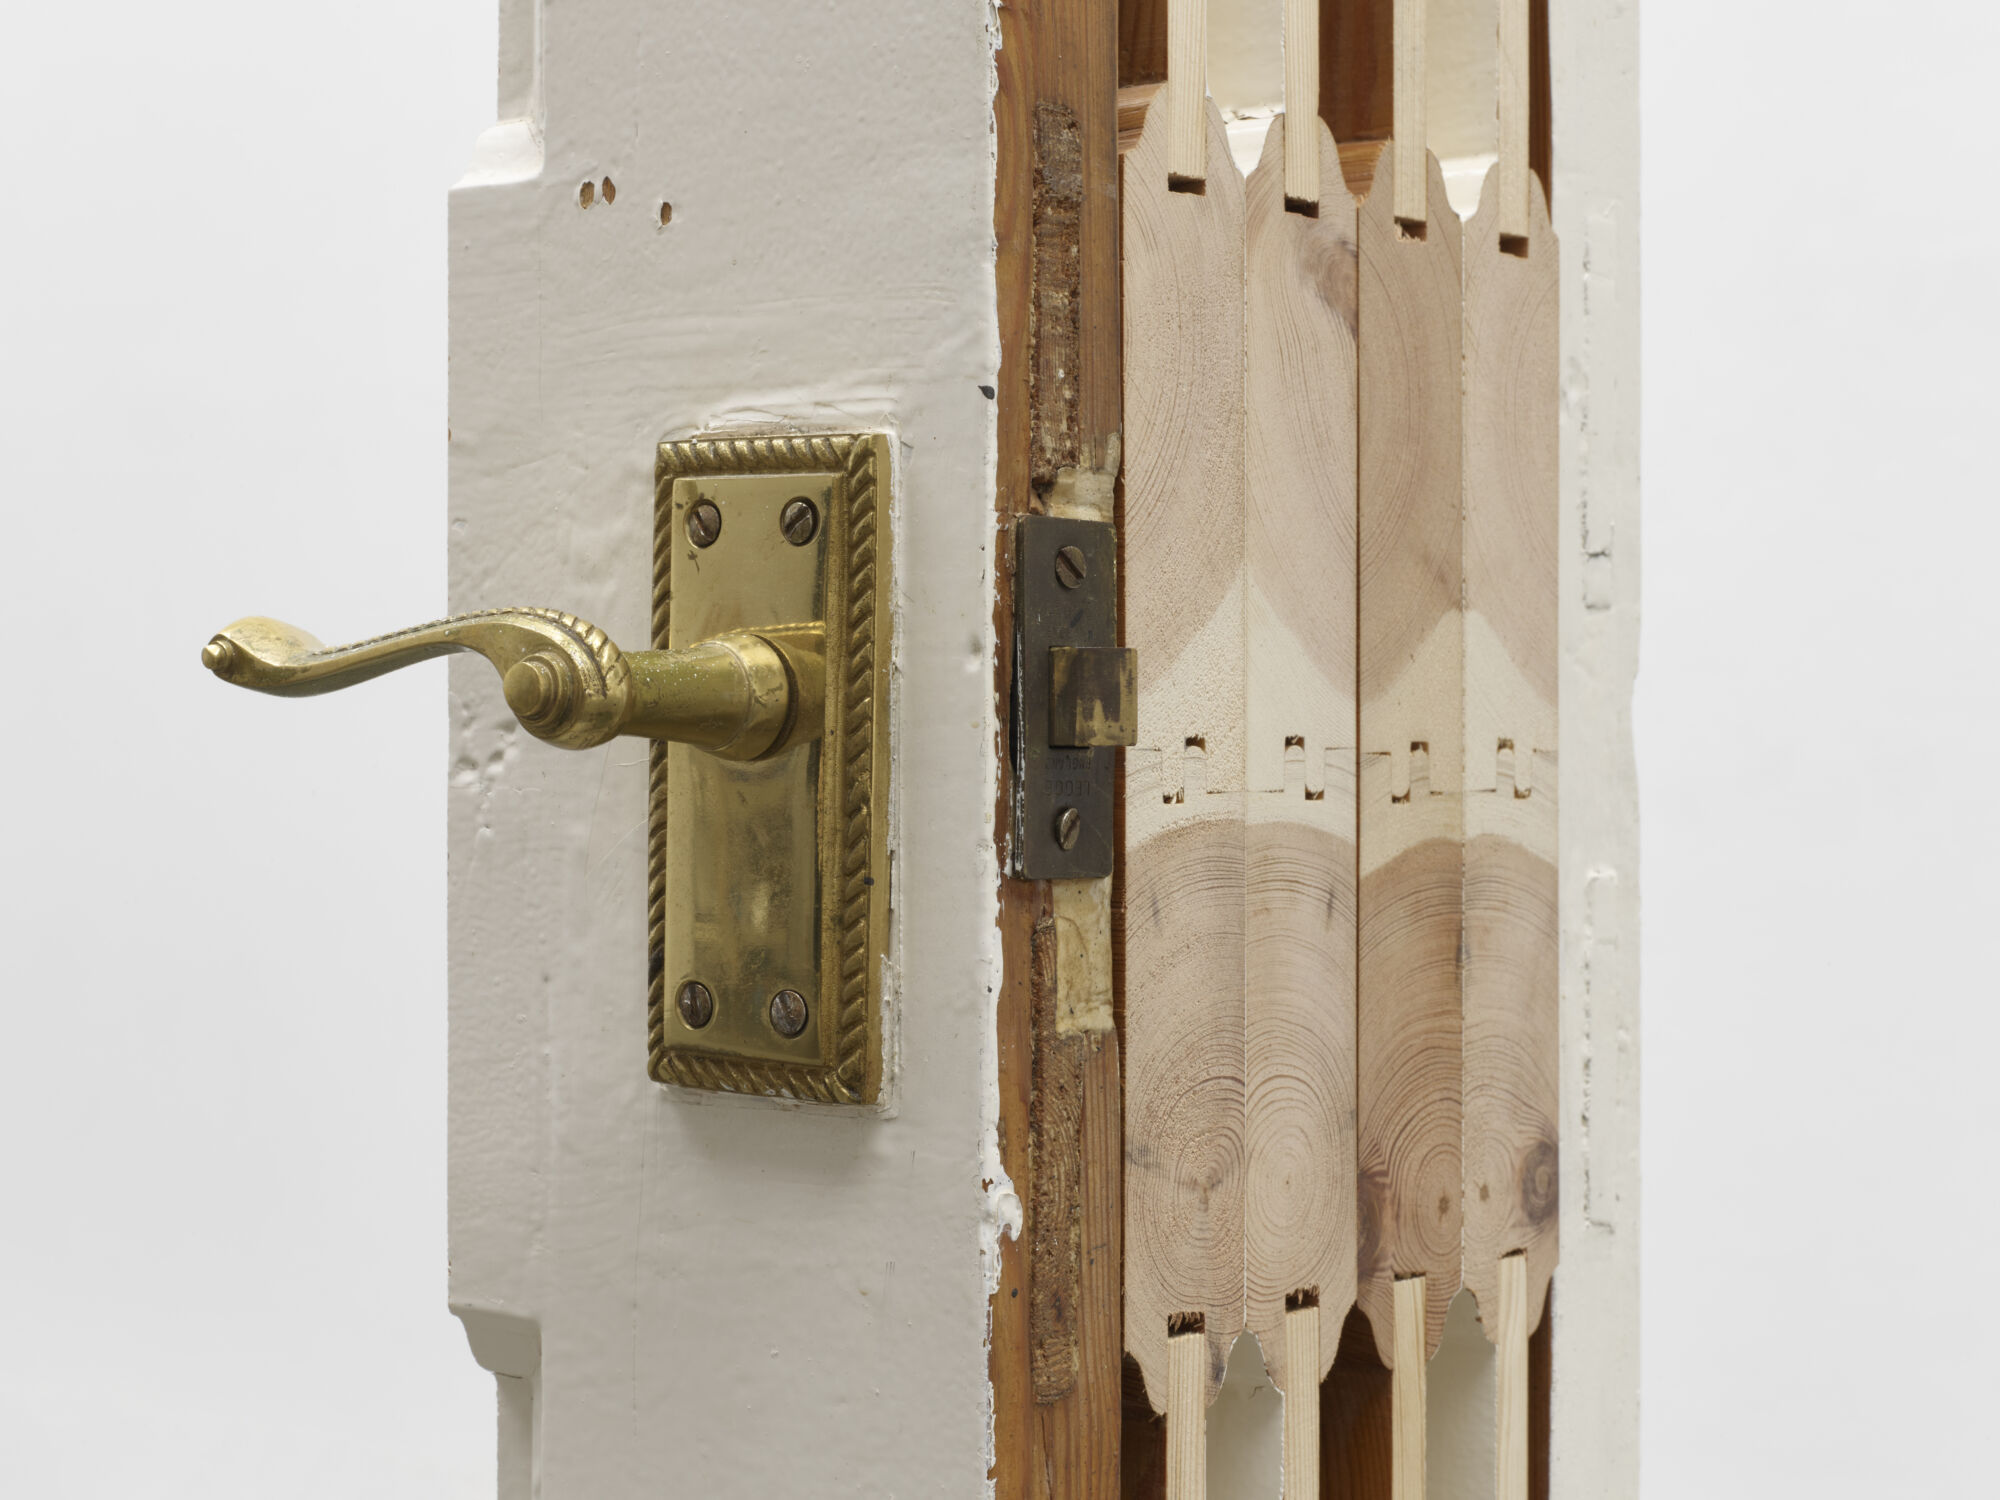 The Wick - Christian Marclay
Vertical Cuts (White Door)
2023
Altered wooden door
194.6 x 27.5 x 13.5 cm | 76 5/8 x 10 13/16 x 5 5/16 in.
© Christian Marclay. Photo © White Cube (Theo Christelis)